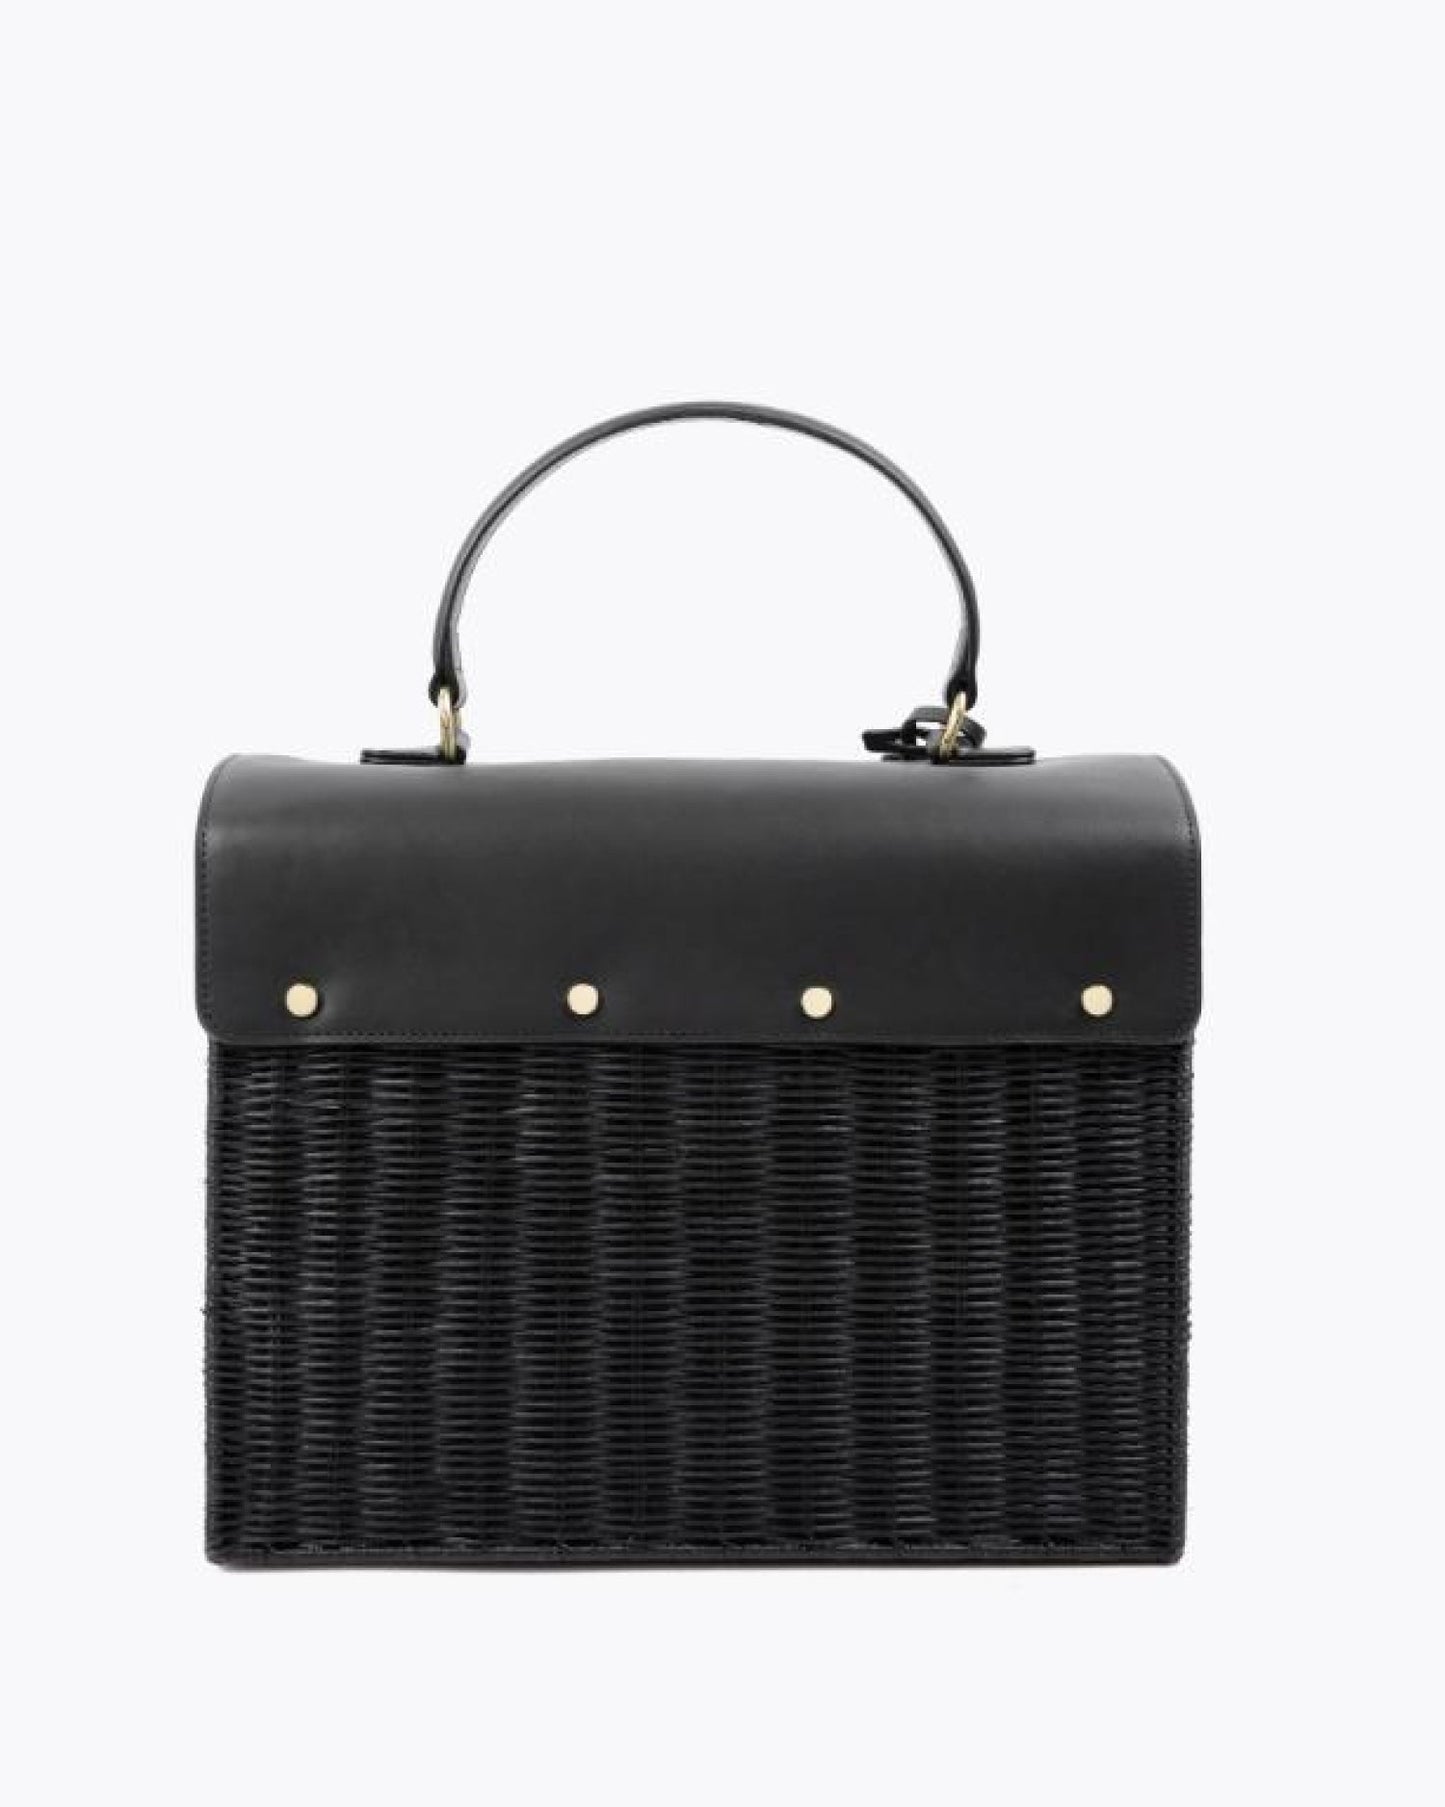 THE LARGE LUNCHER - BLACK WICKER by Modern Picnic